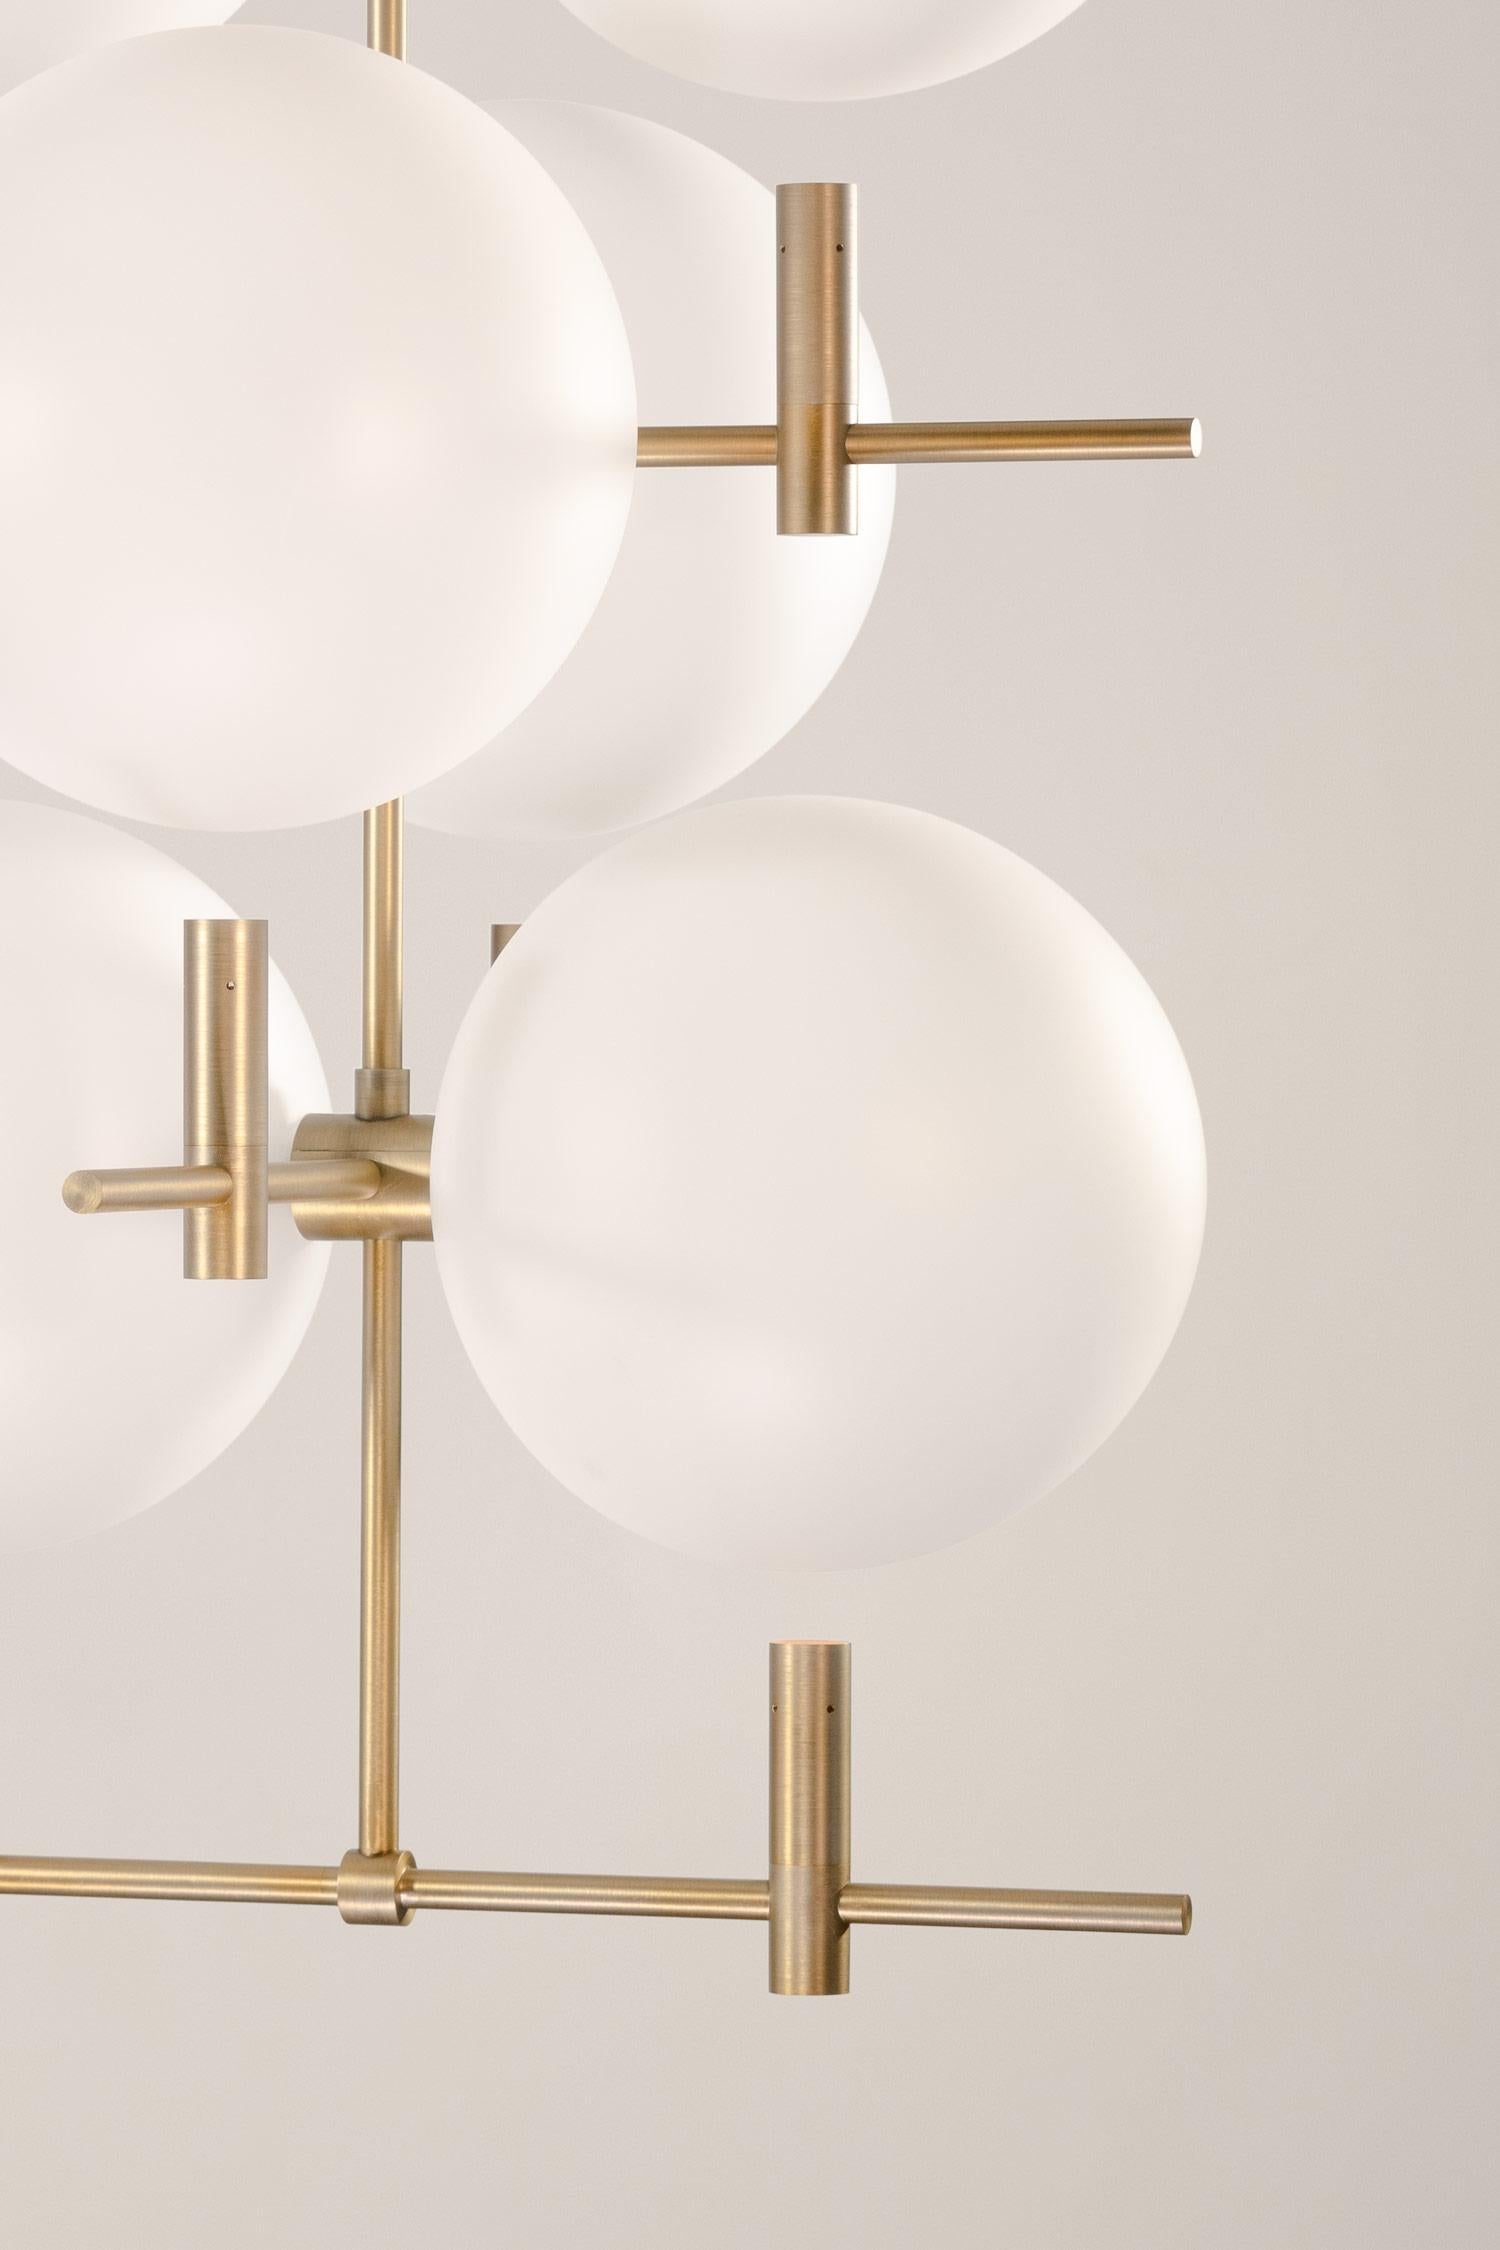 Czech Luna Luminaire / Chandelier Vertical I04 in Brushed Gold For Sale